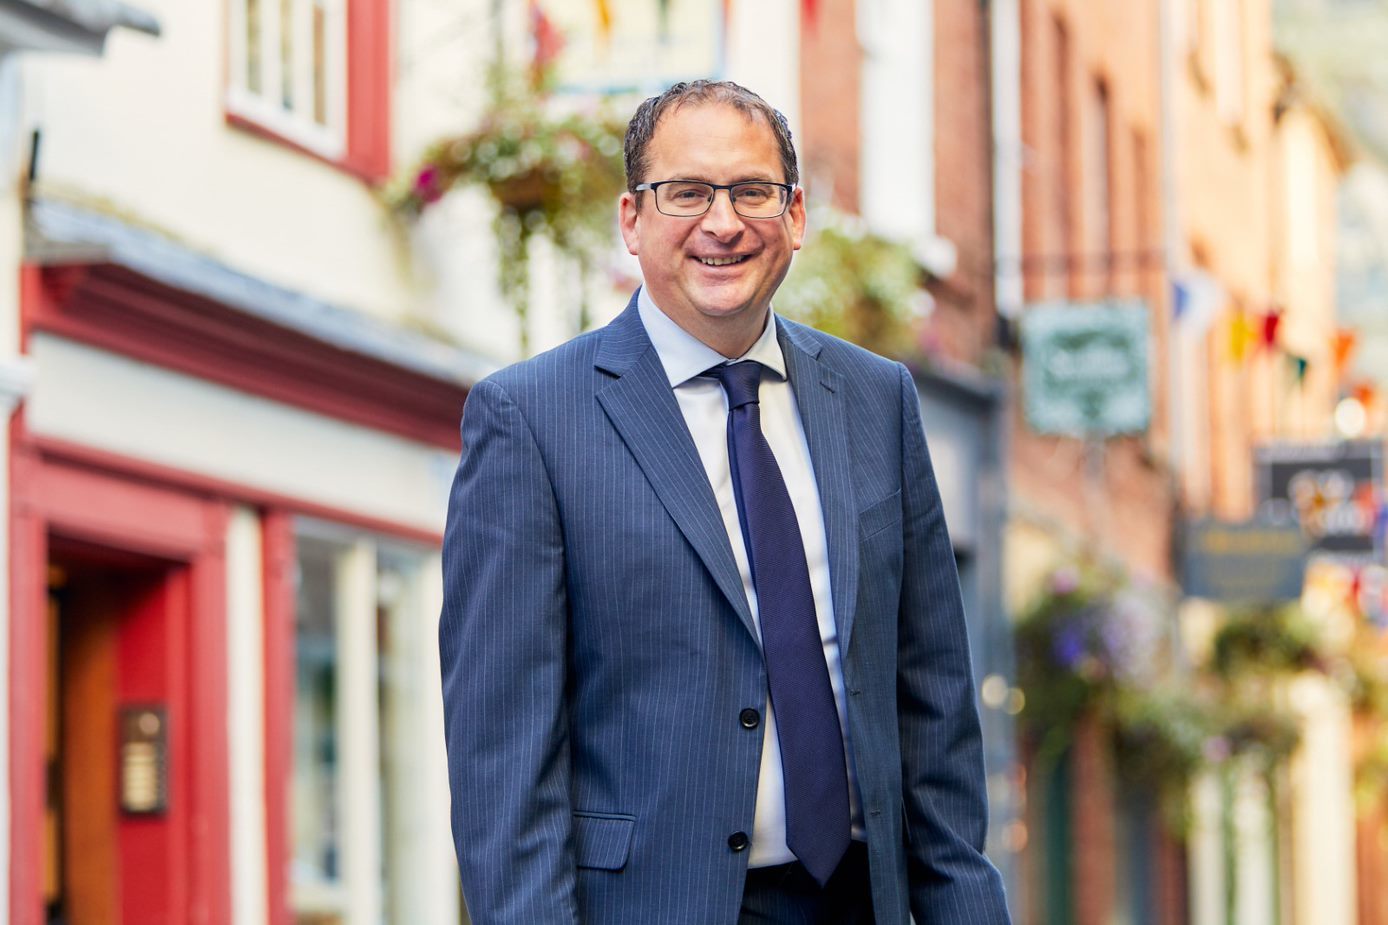 Mike Truelove, Hereford Business Imrprovement Districts chief executive, is worried about a new vision for Hereford streets 